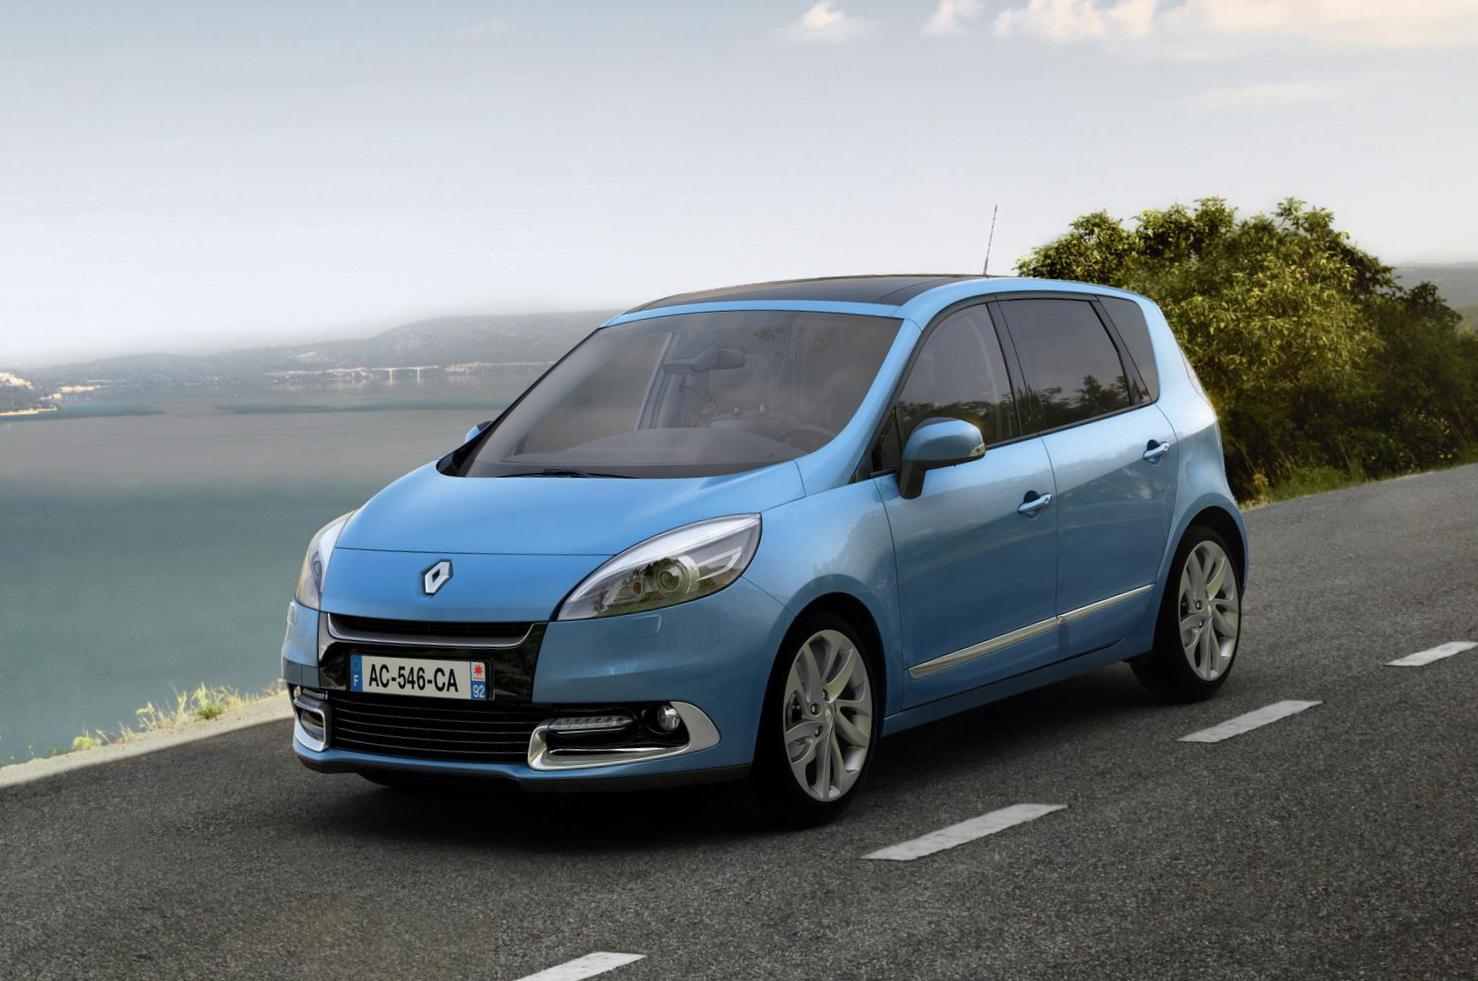 Grand Scenic Renault review 2015